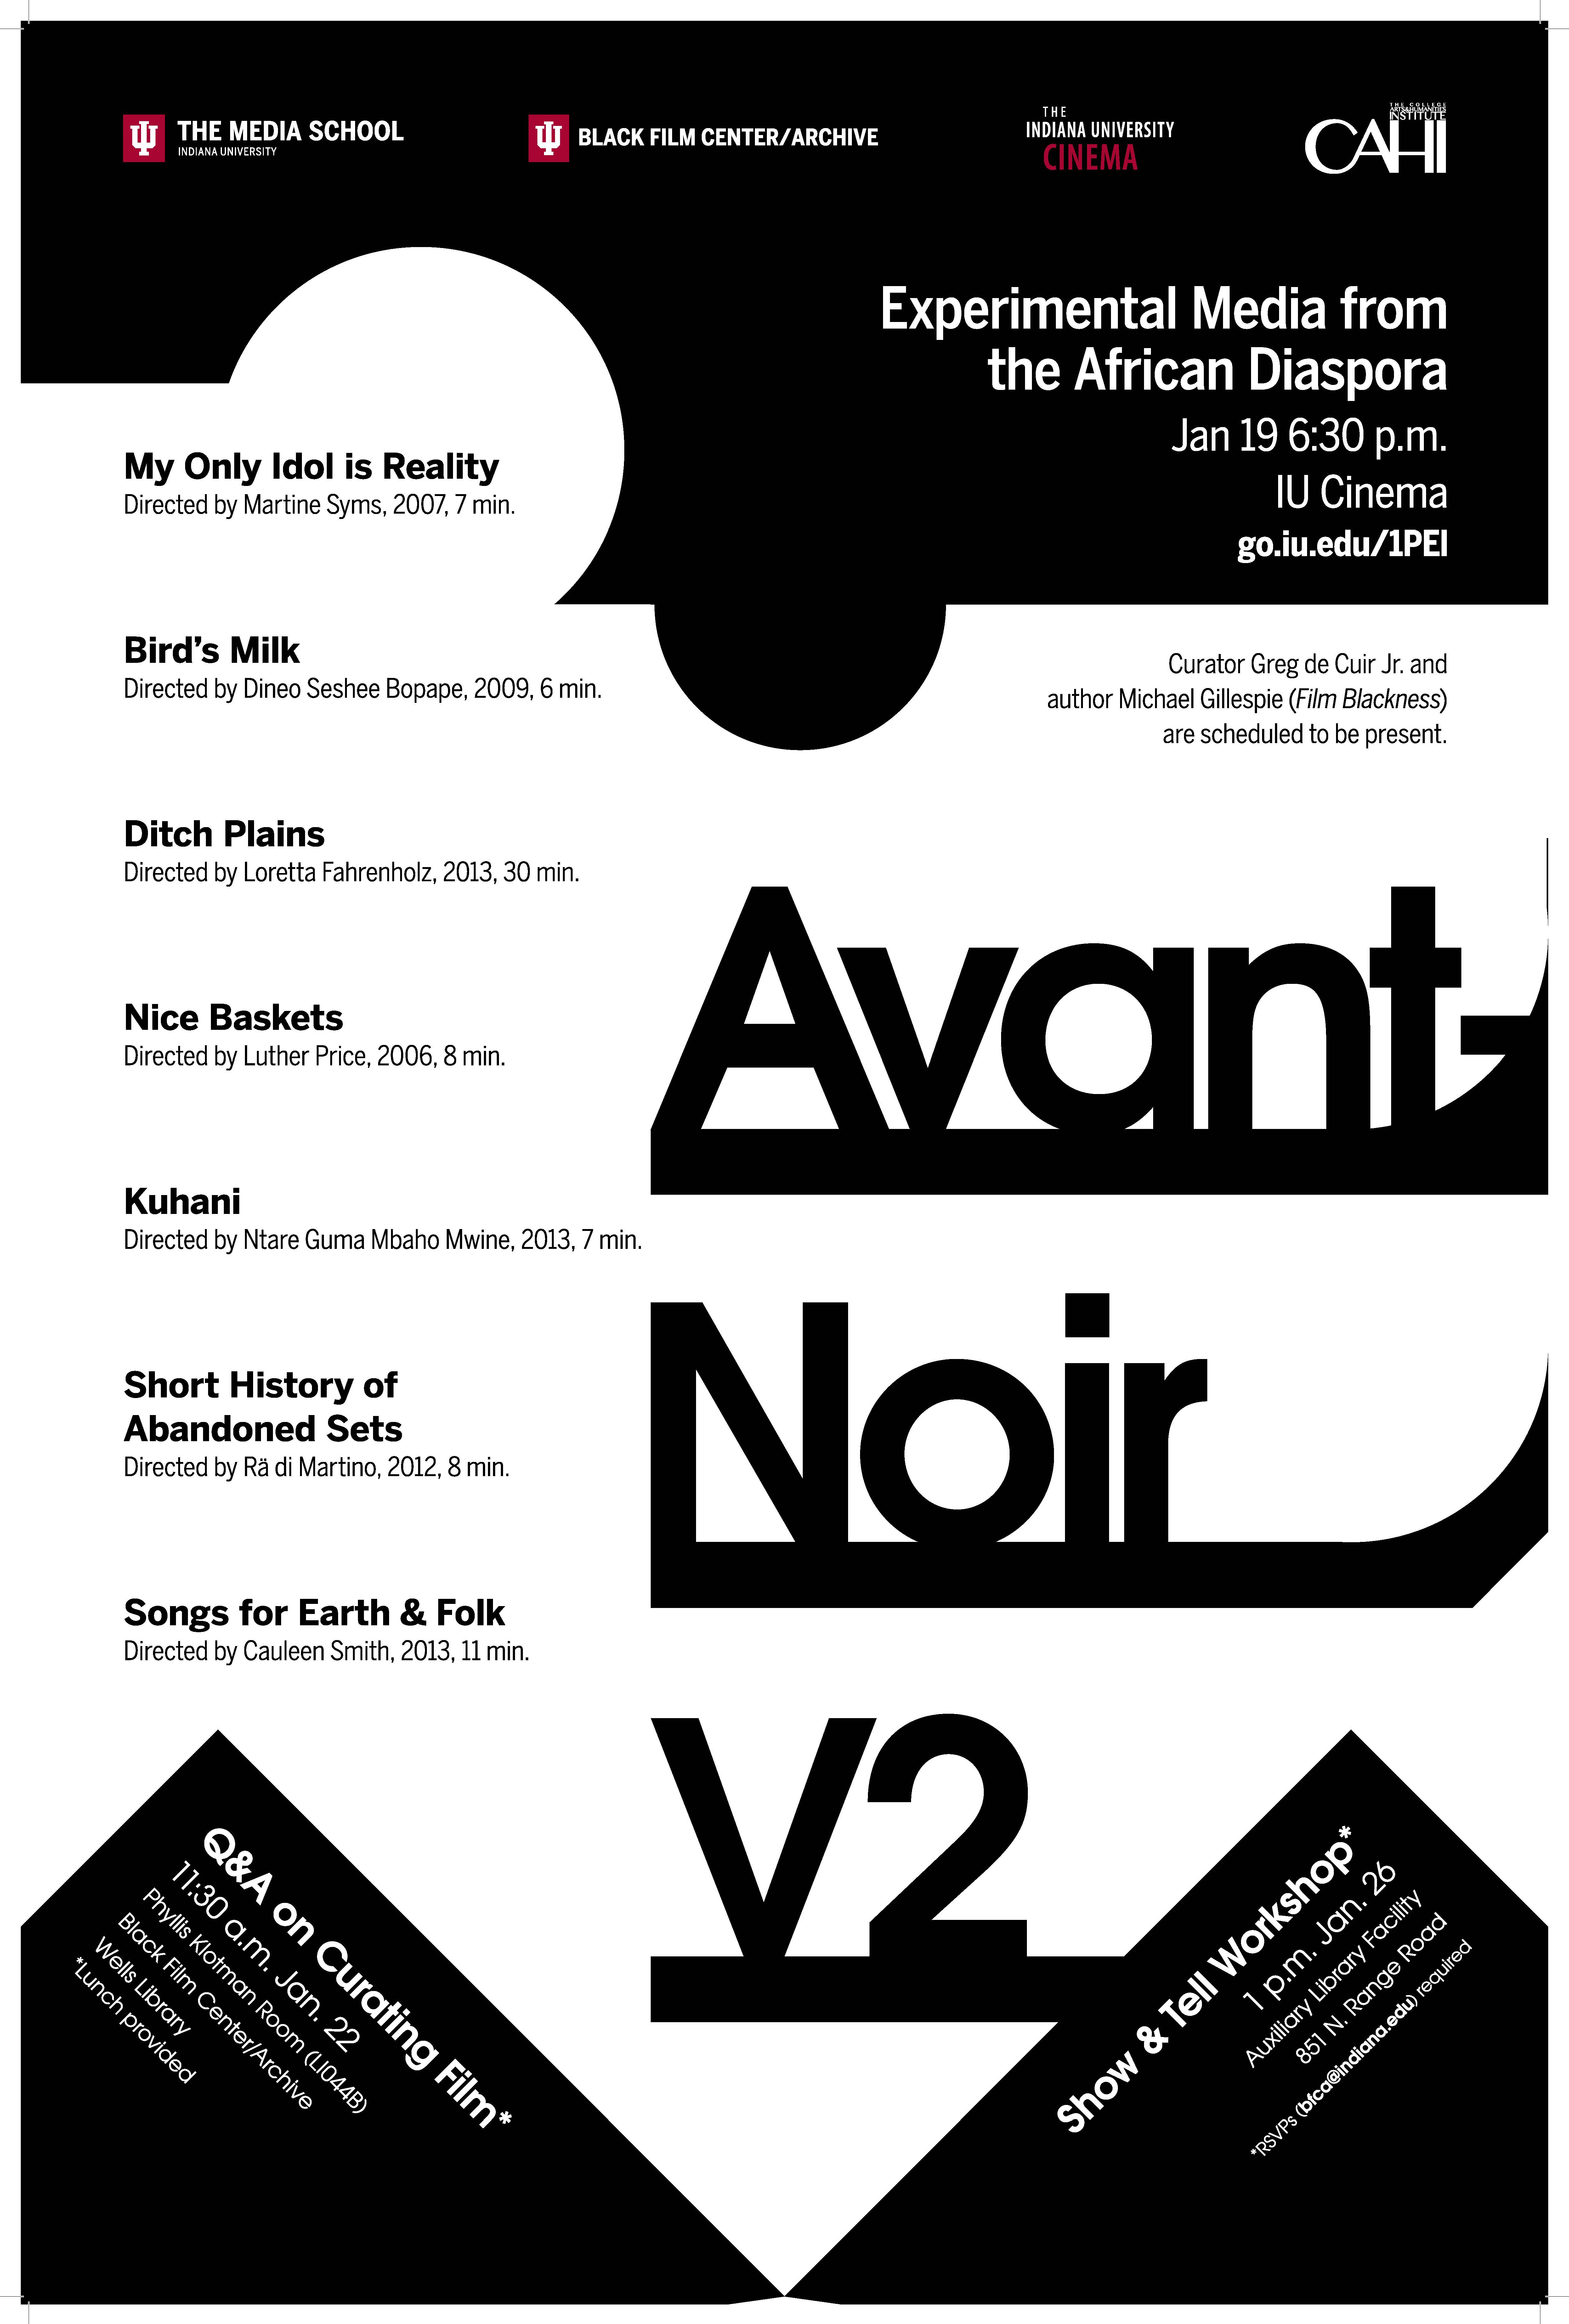 The poster for de Cuir Jr.'s Avant-Noir V2 presentation. "Avant-Noir V2" is in large text on the right side.   Additional text reads: "Experimental Media from the African Diaspora. Jan 19, 6:30 p.m. IU Cinema. go.iu.edu/1PEI. Curator Greg de Cuir Jr. and author Michael Gillespie ('Film Blackness') are scheduled to be present. Q&A on Curating Film (lunch provided). 11:30 a.m. Jan 22. Phyllis Klotman Room (LI044B). Black Film Center/Archive. Wells Library. Show & Tell Workshop. 1 p.m. Jan 26, Auxiliary Library Facility. 851 N. Range Road. RSVPS (bfca@indiana.edu) required."  The list of films text reads: "My Only Idol is Reality, directed by Martine Syms, 2007, 7 min. Bird's Milk, directed by Dineo Seshee Bopape, 2009, 6 min. Ditch Plains, directed by Loretta Fahrenholz, 2013, 30 min. Nice Baskets, directed by Luther Price, 2006, 8 min. Kuhani, directed by Ntare Guma Mbaho Mwine, 2013, 7 min. Short History of Abandoned Sets, directed by Rä di Martino, 2012, 8 min. Songs for Earth & Folk, directed by Cauleen Smith, 2013, 11 min."  Sponsors on the poster were The Media School, Black Film Center/Archive, The Indiana University Cinema, and the College Arts and Humanities Institute. 